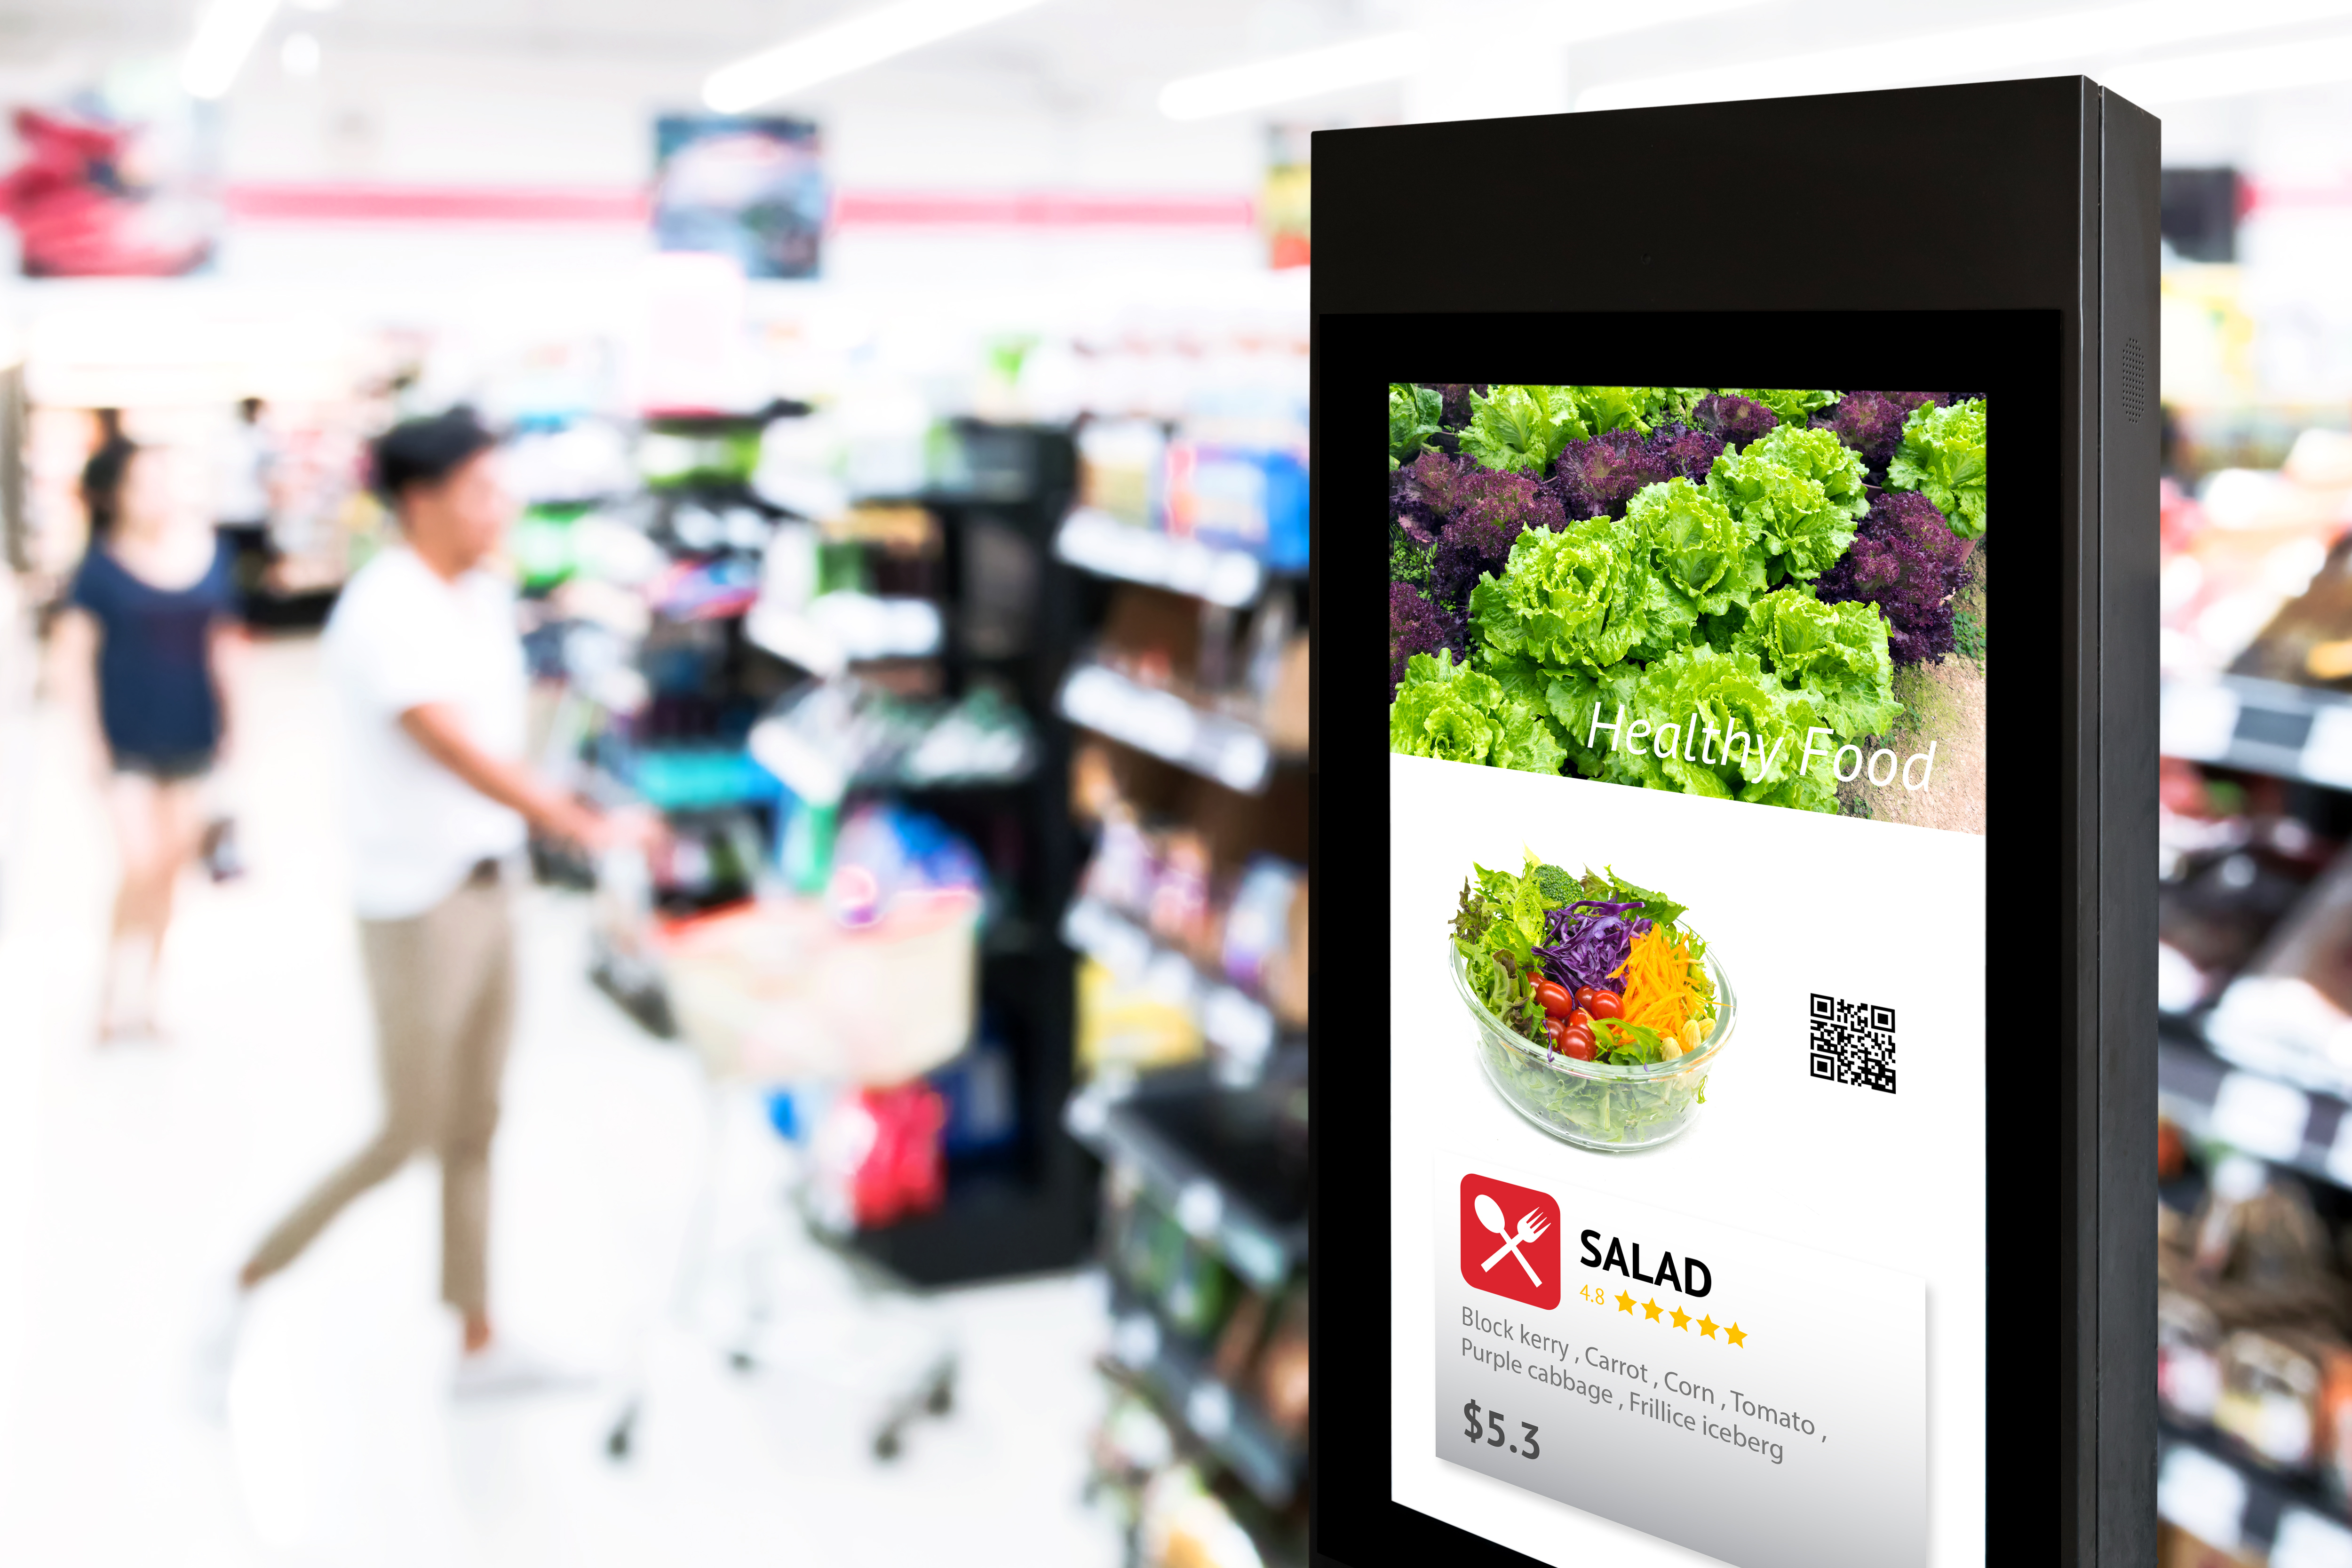 What's in store for digital signage in 2020 and beyond?